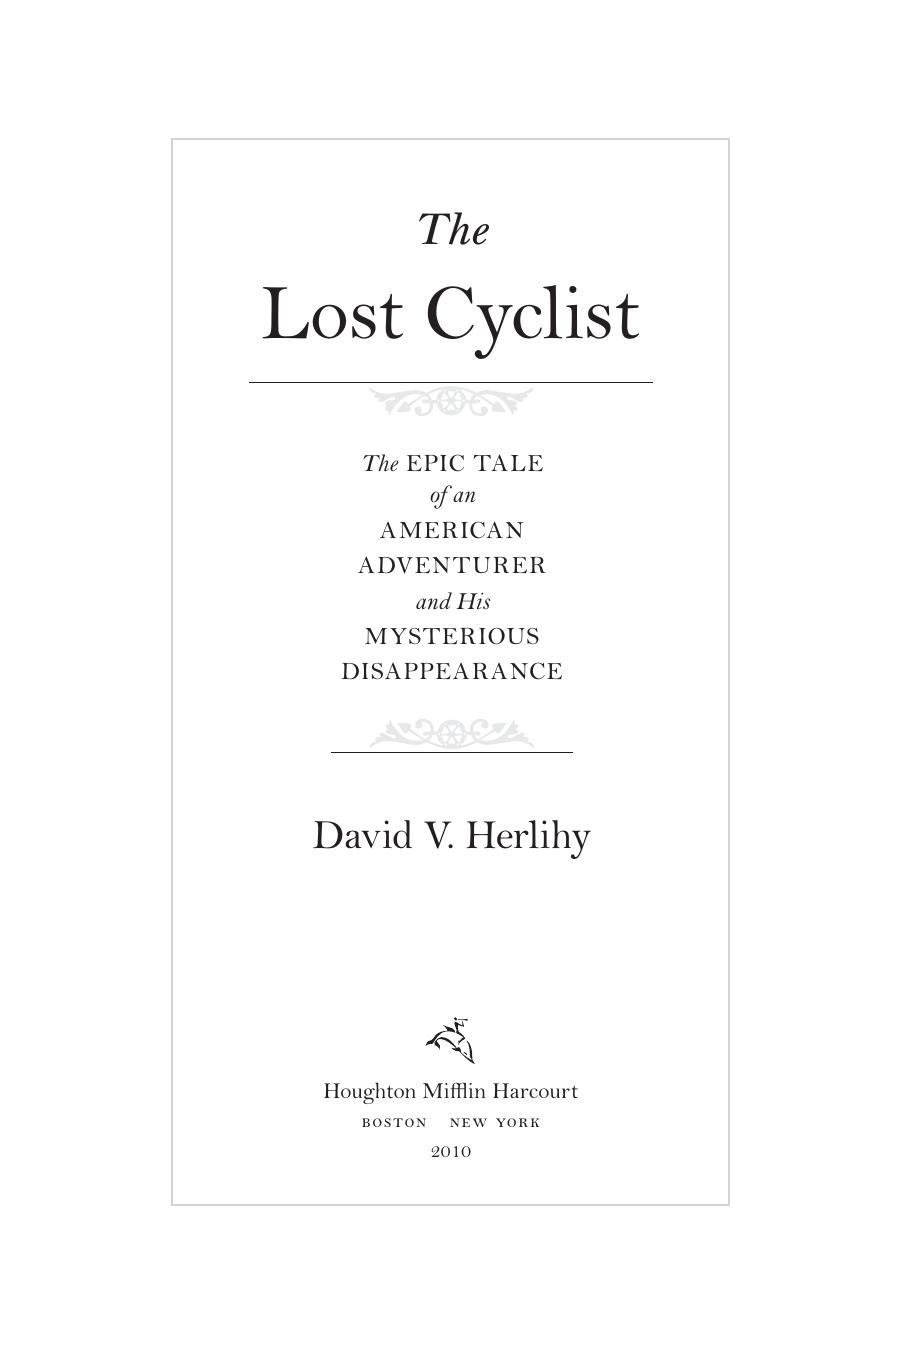 The Lost Cyclist: The Epic Tale of an American Adventurer and His Mysterious Disappearance by David V. Herlihy